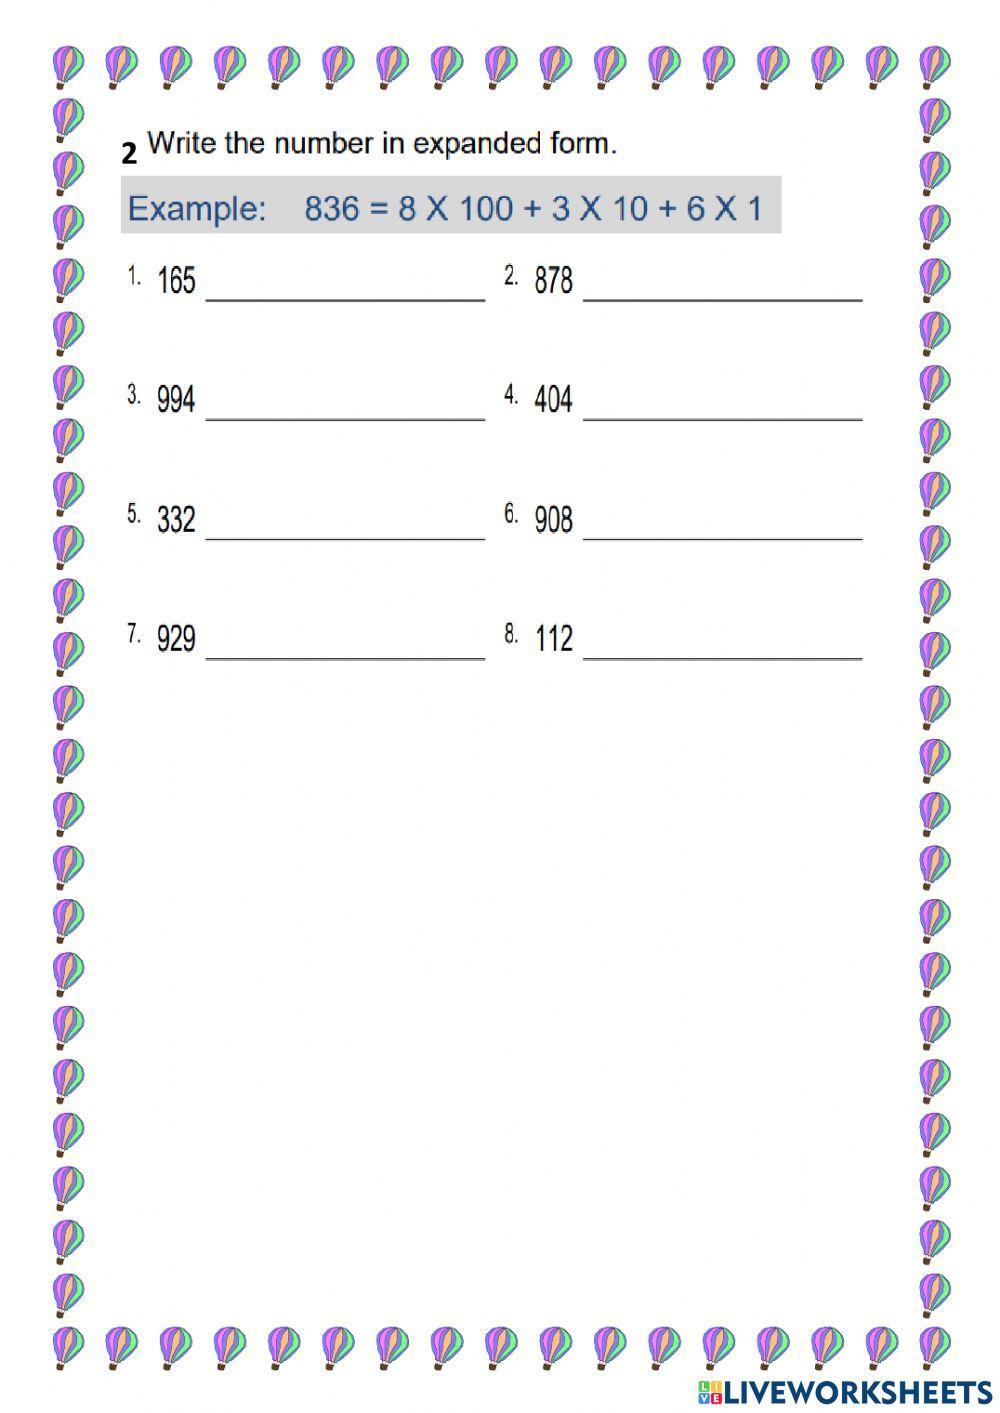 Place Value and Expanded Form of 3-Digit Numbers WS 2